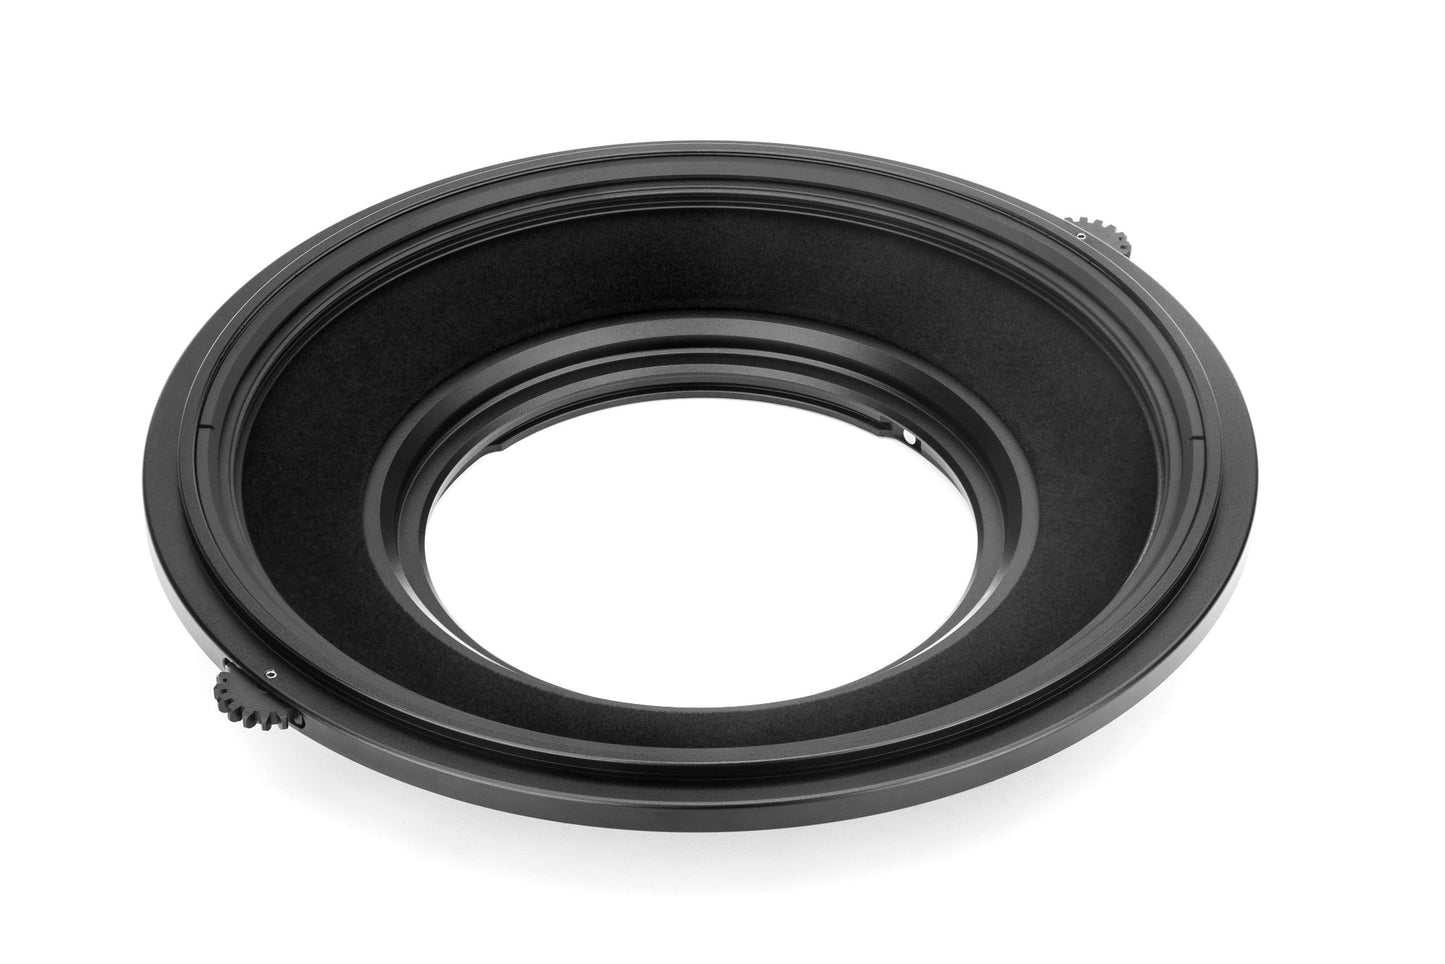 NiSi S6 150mm Filter Holder Kit with Pro CPL for Sony FE 14mm f/1.8 GM